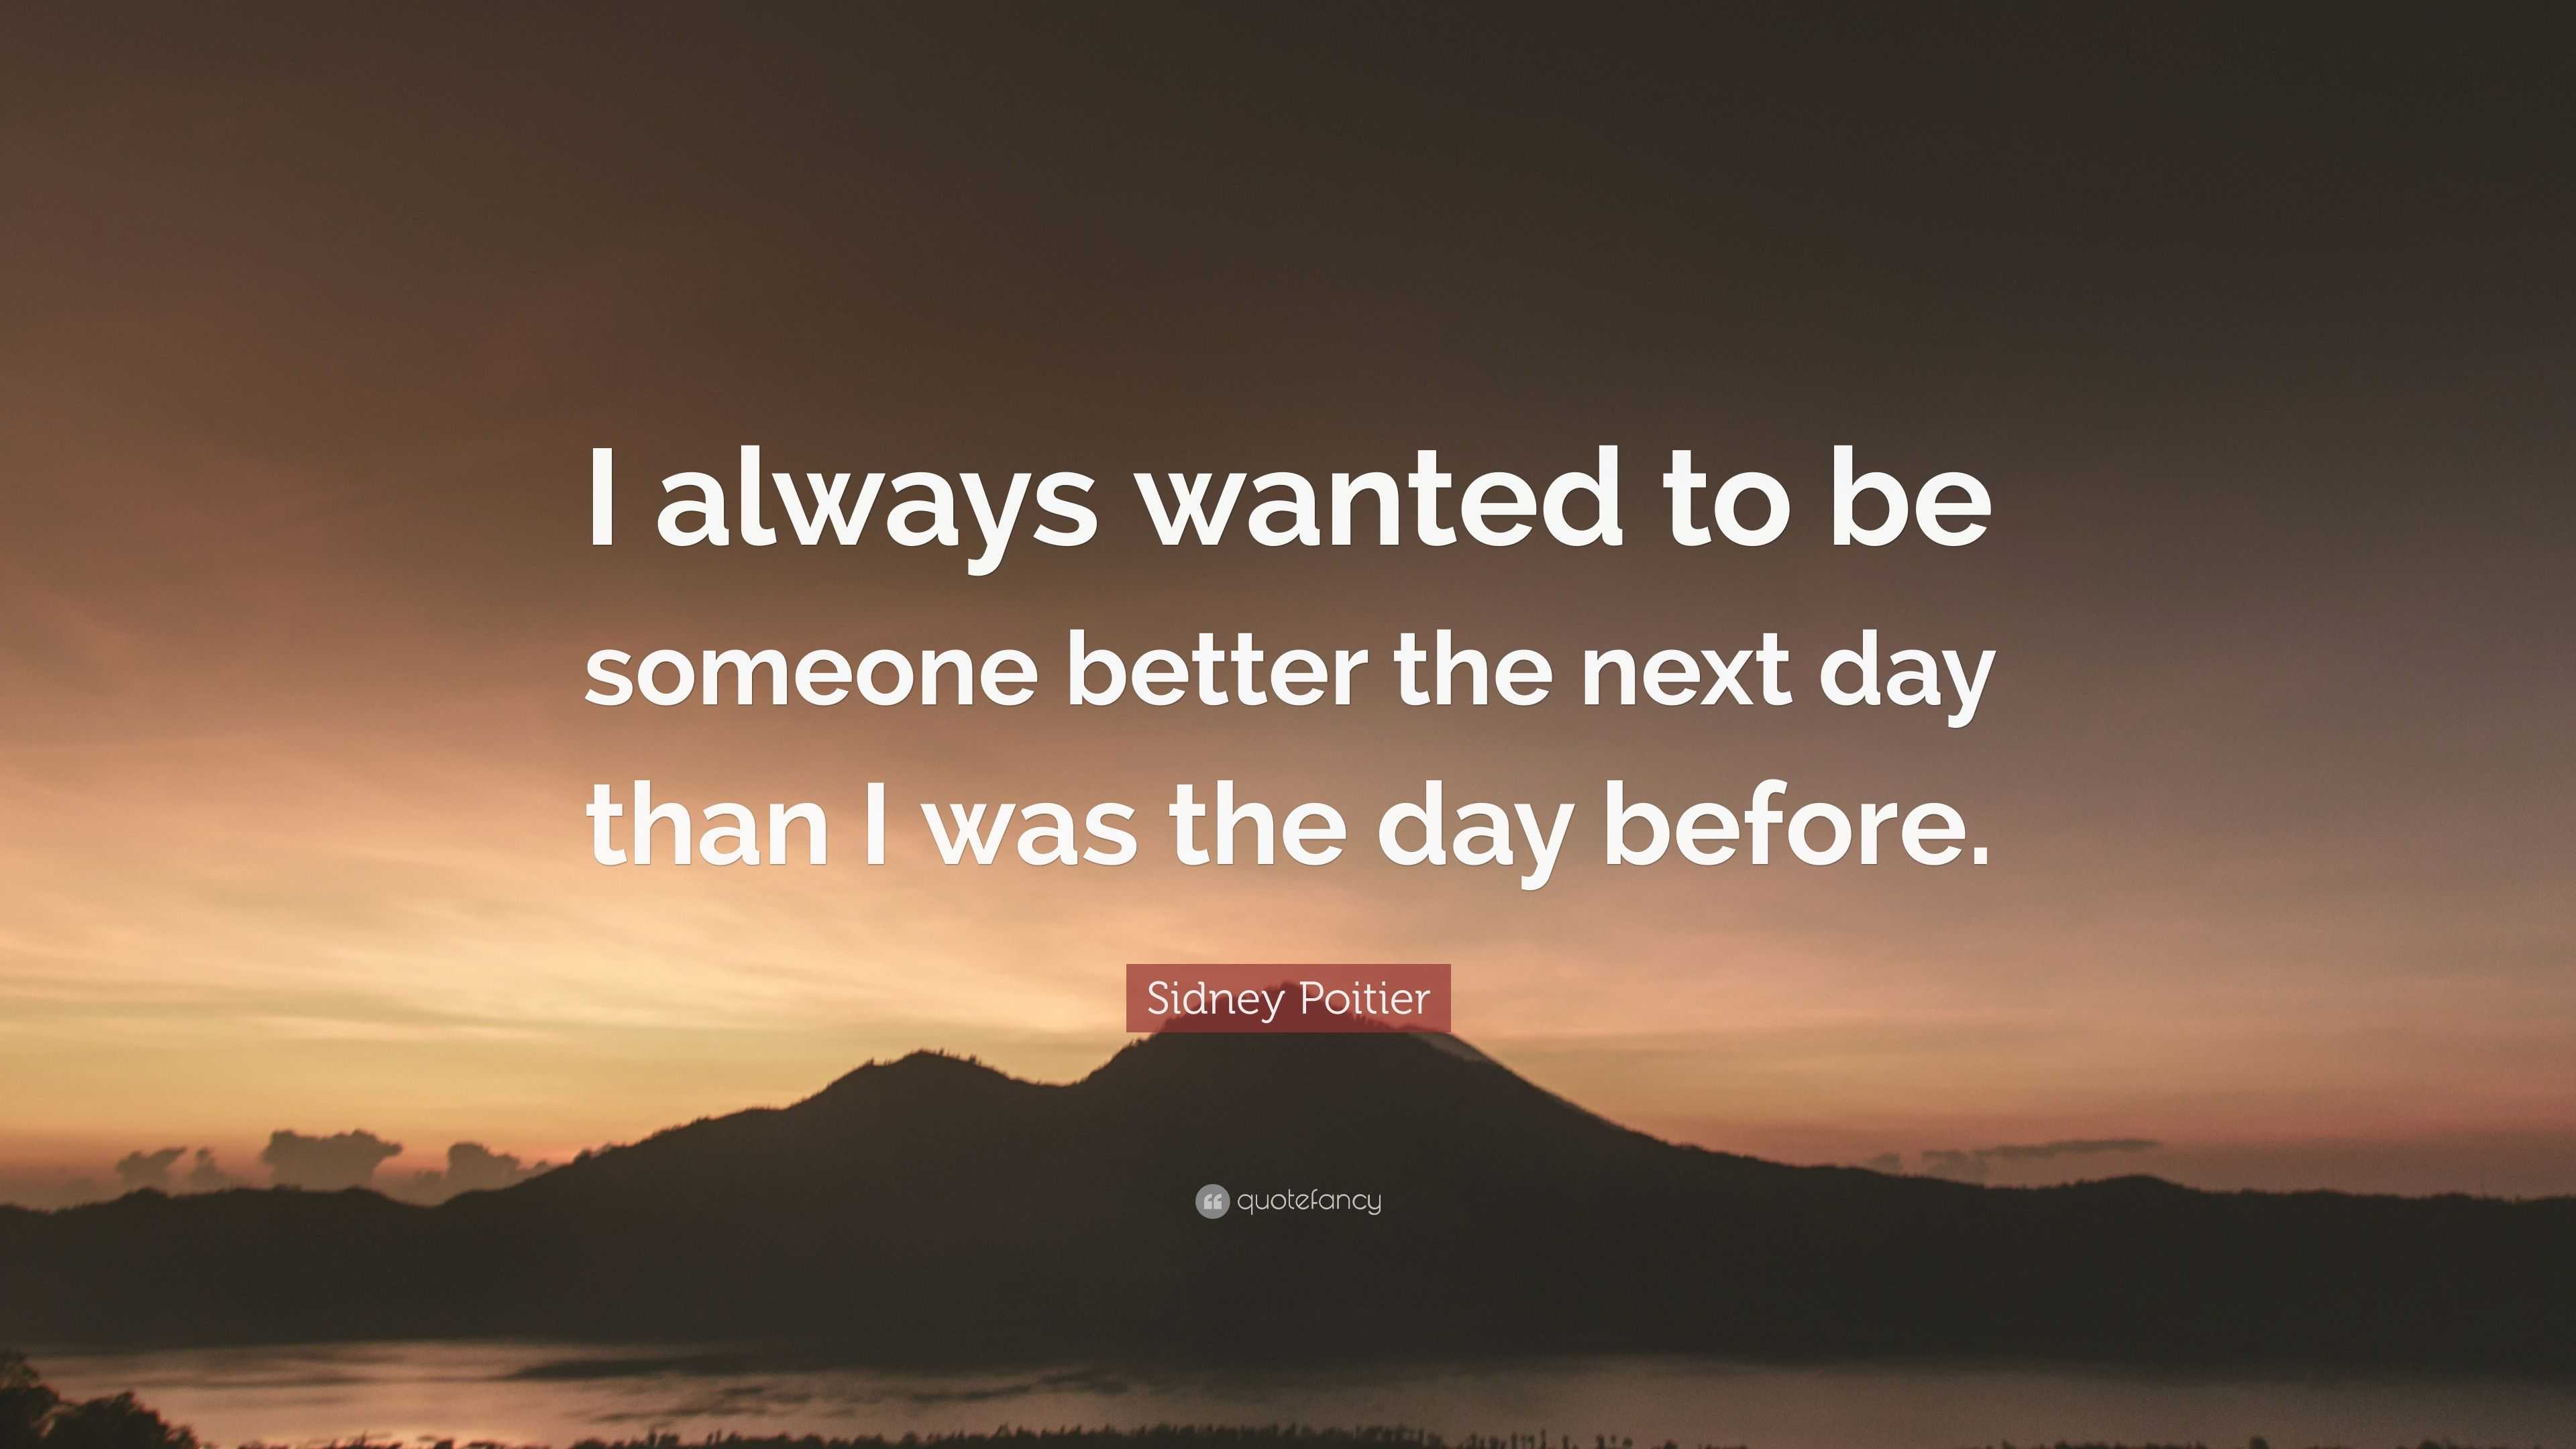 Sidney Poitier Quote: “I always wanted to be someone better the next ...